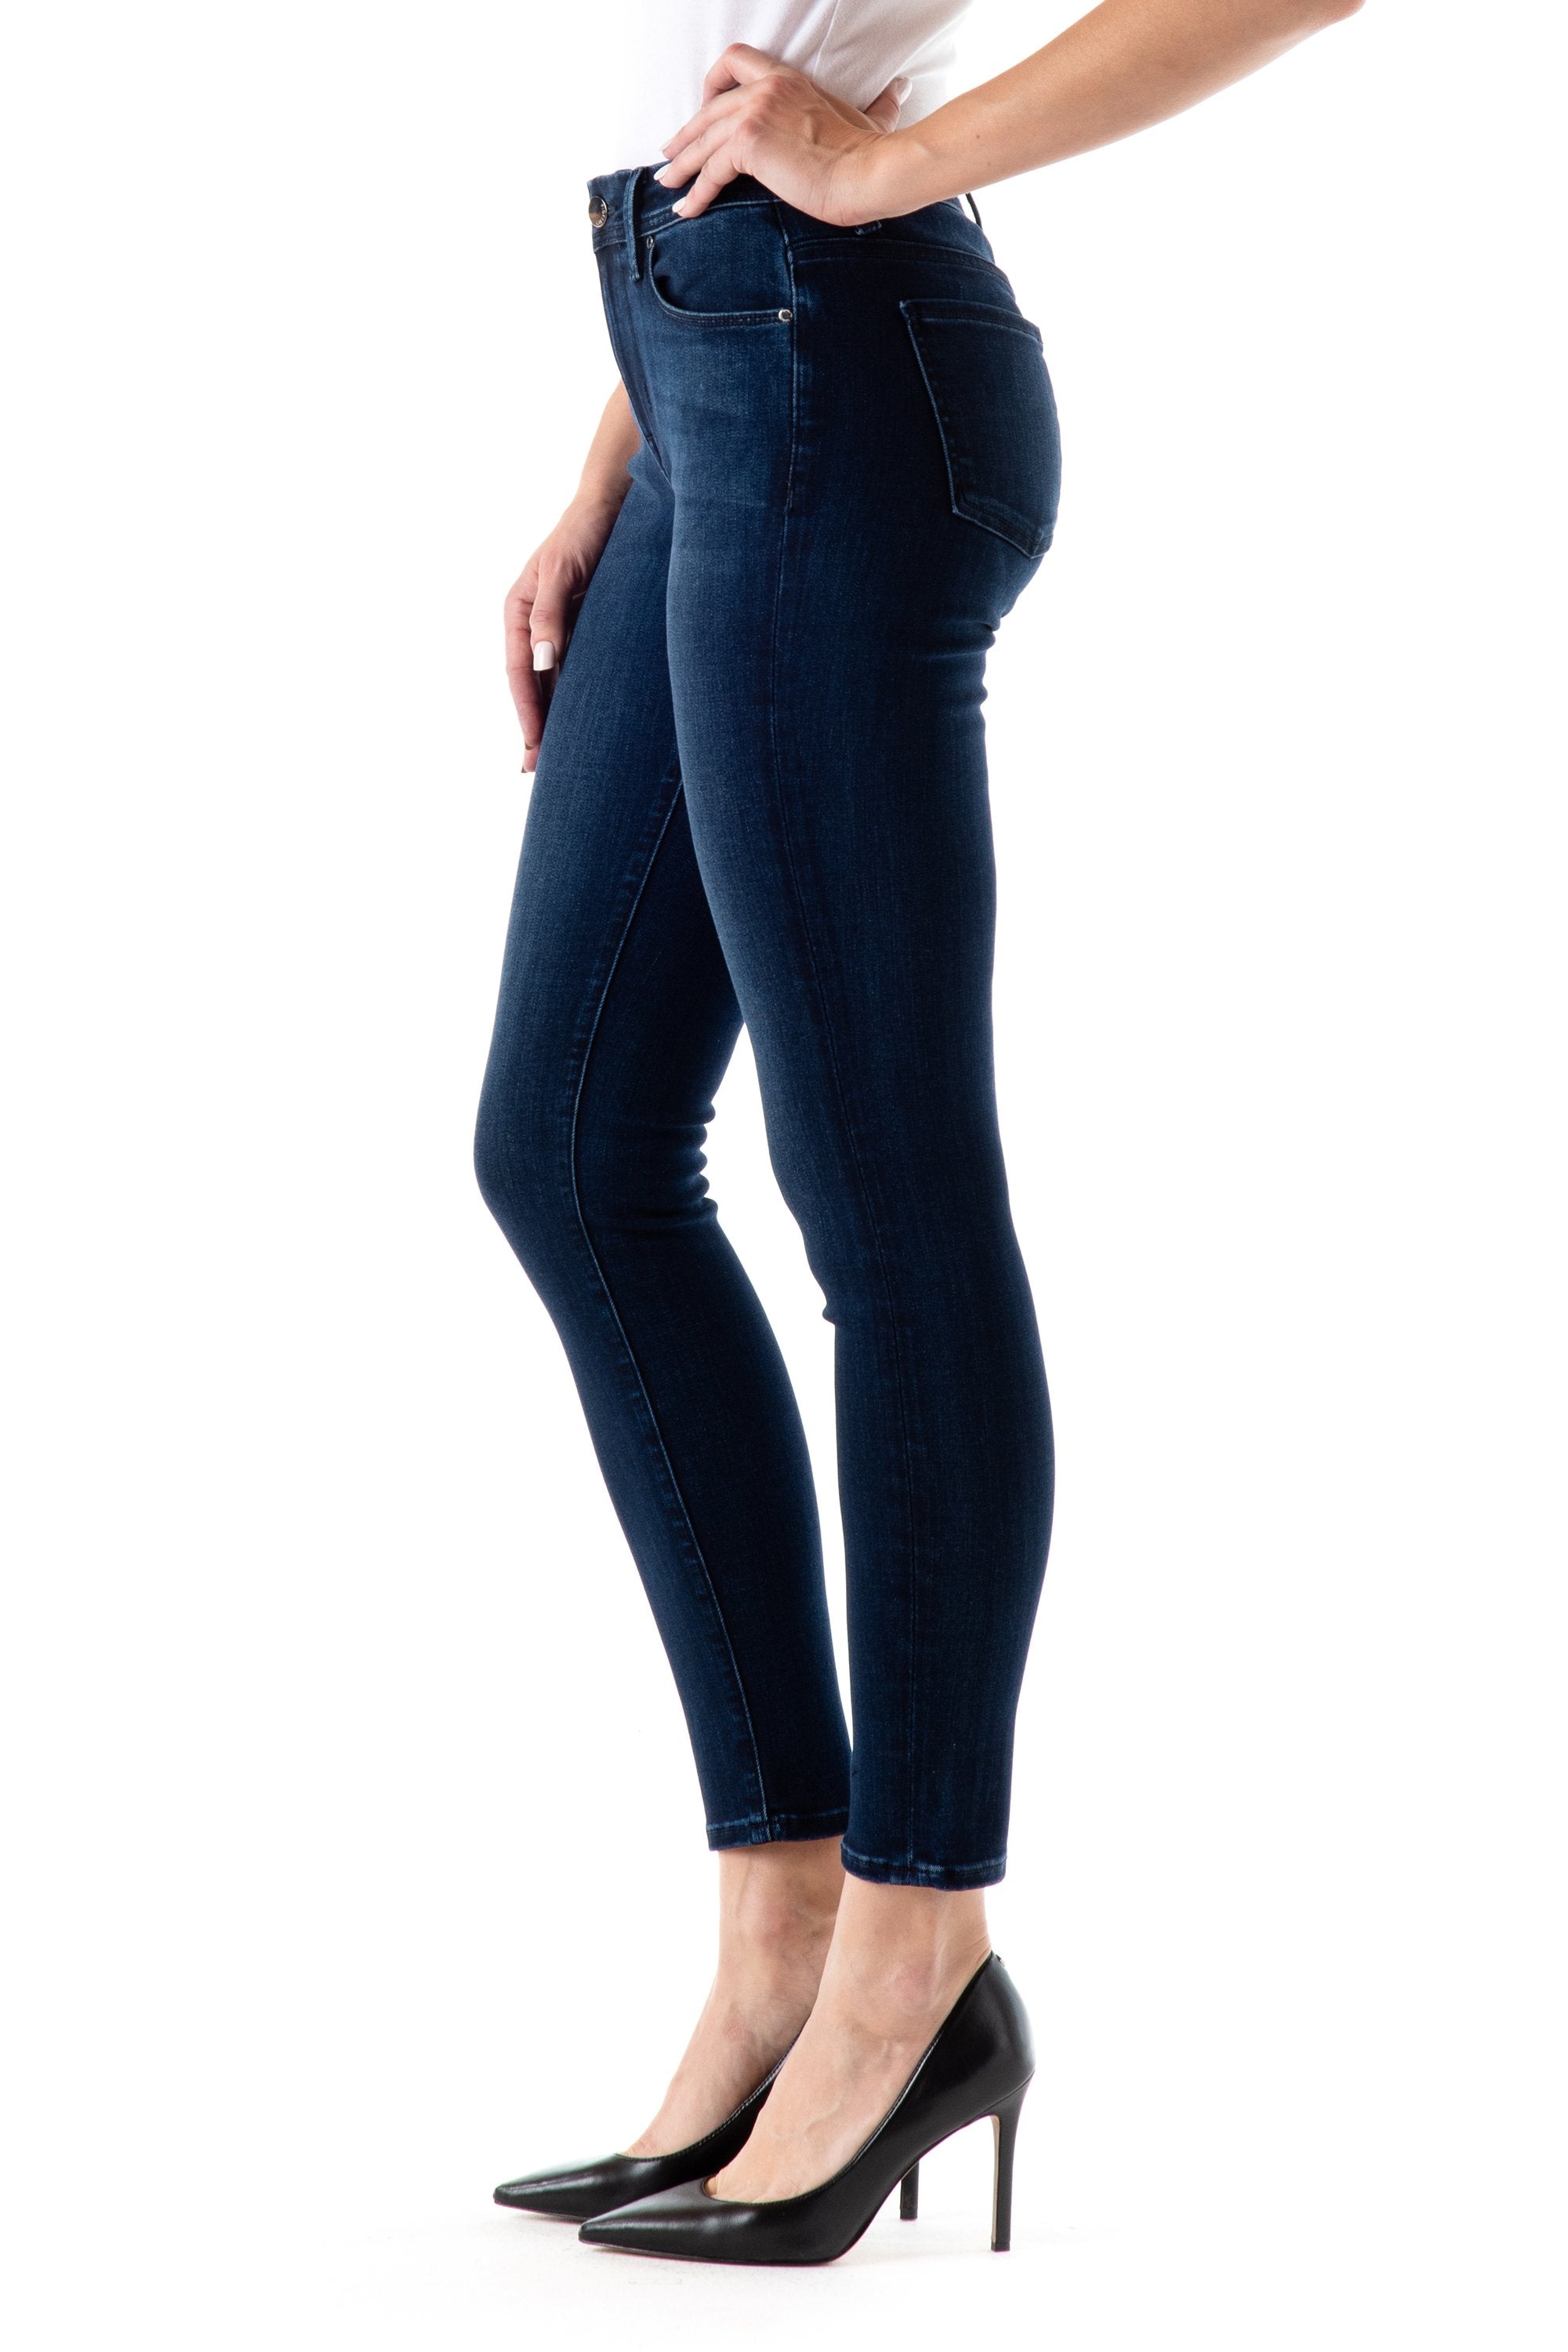 SOLA MID RISE SKINNY JEAN IN LUXE